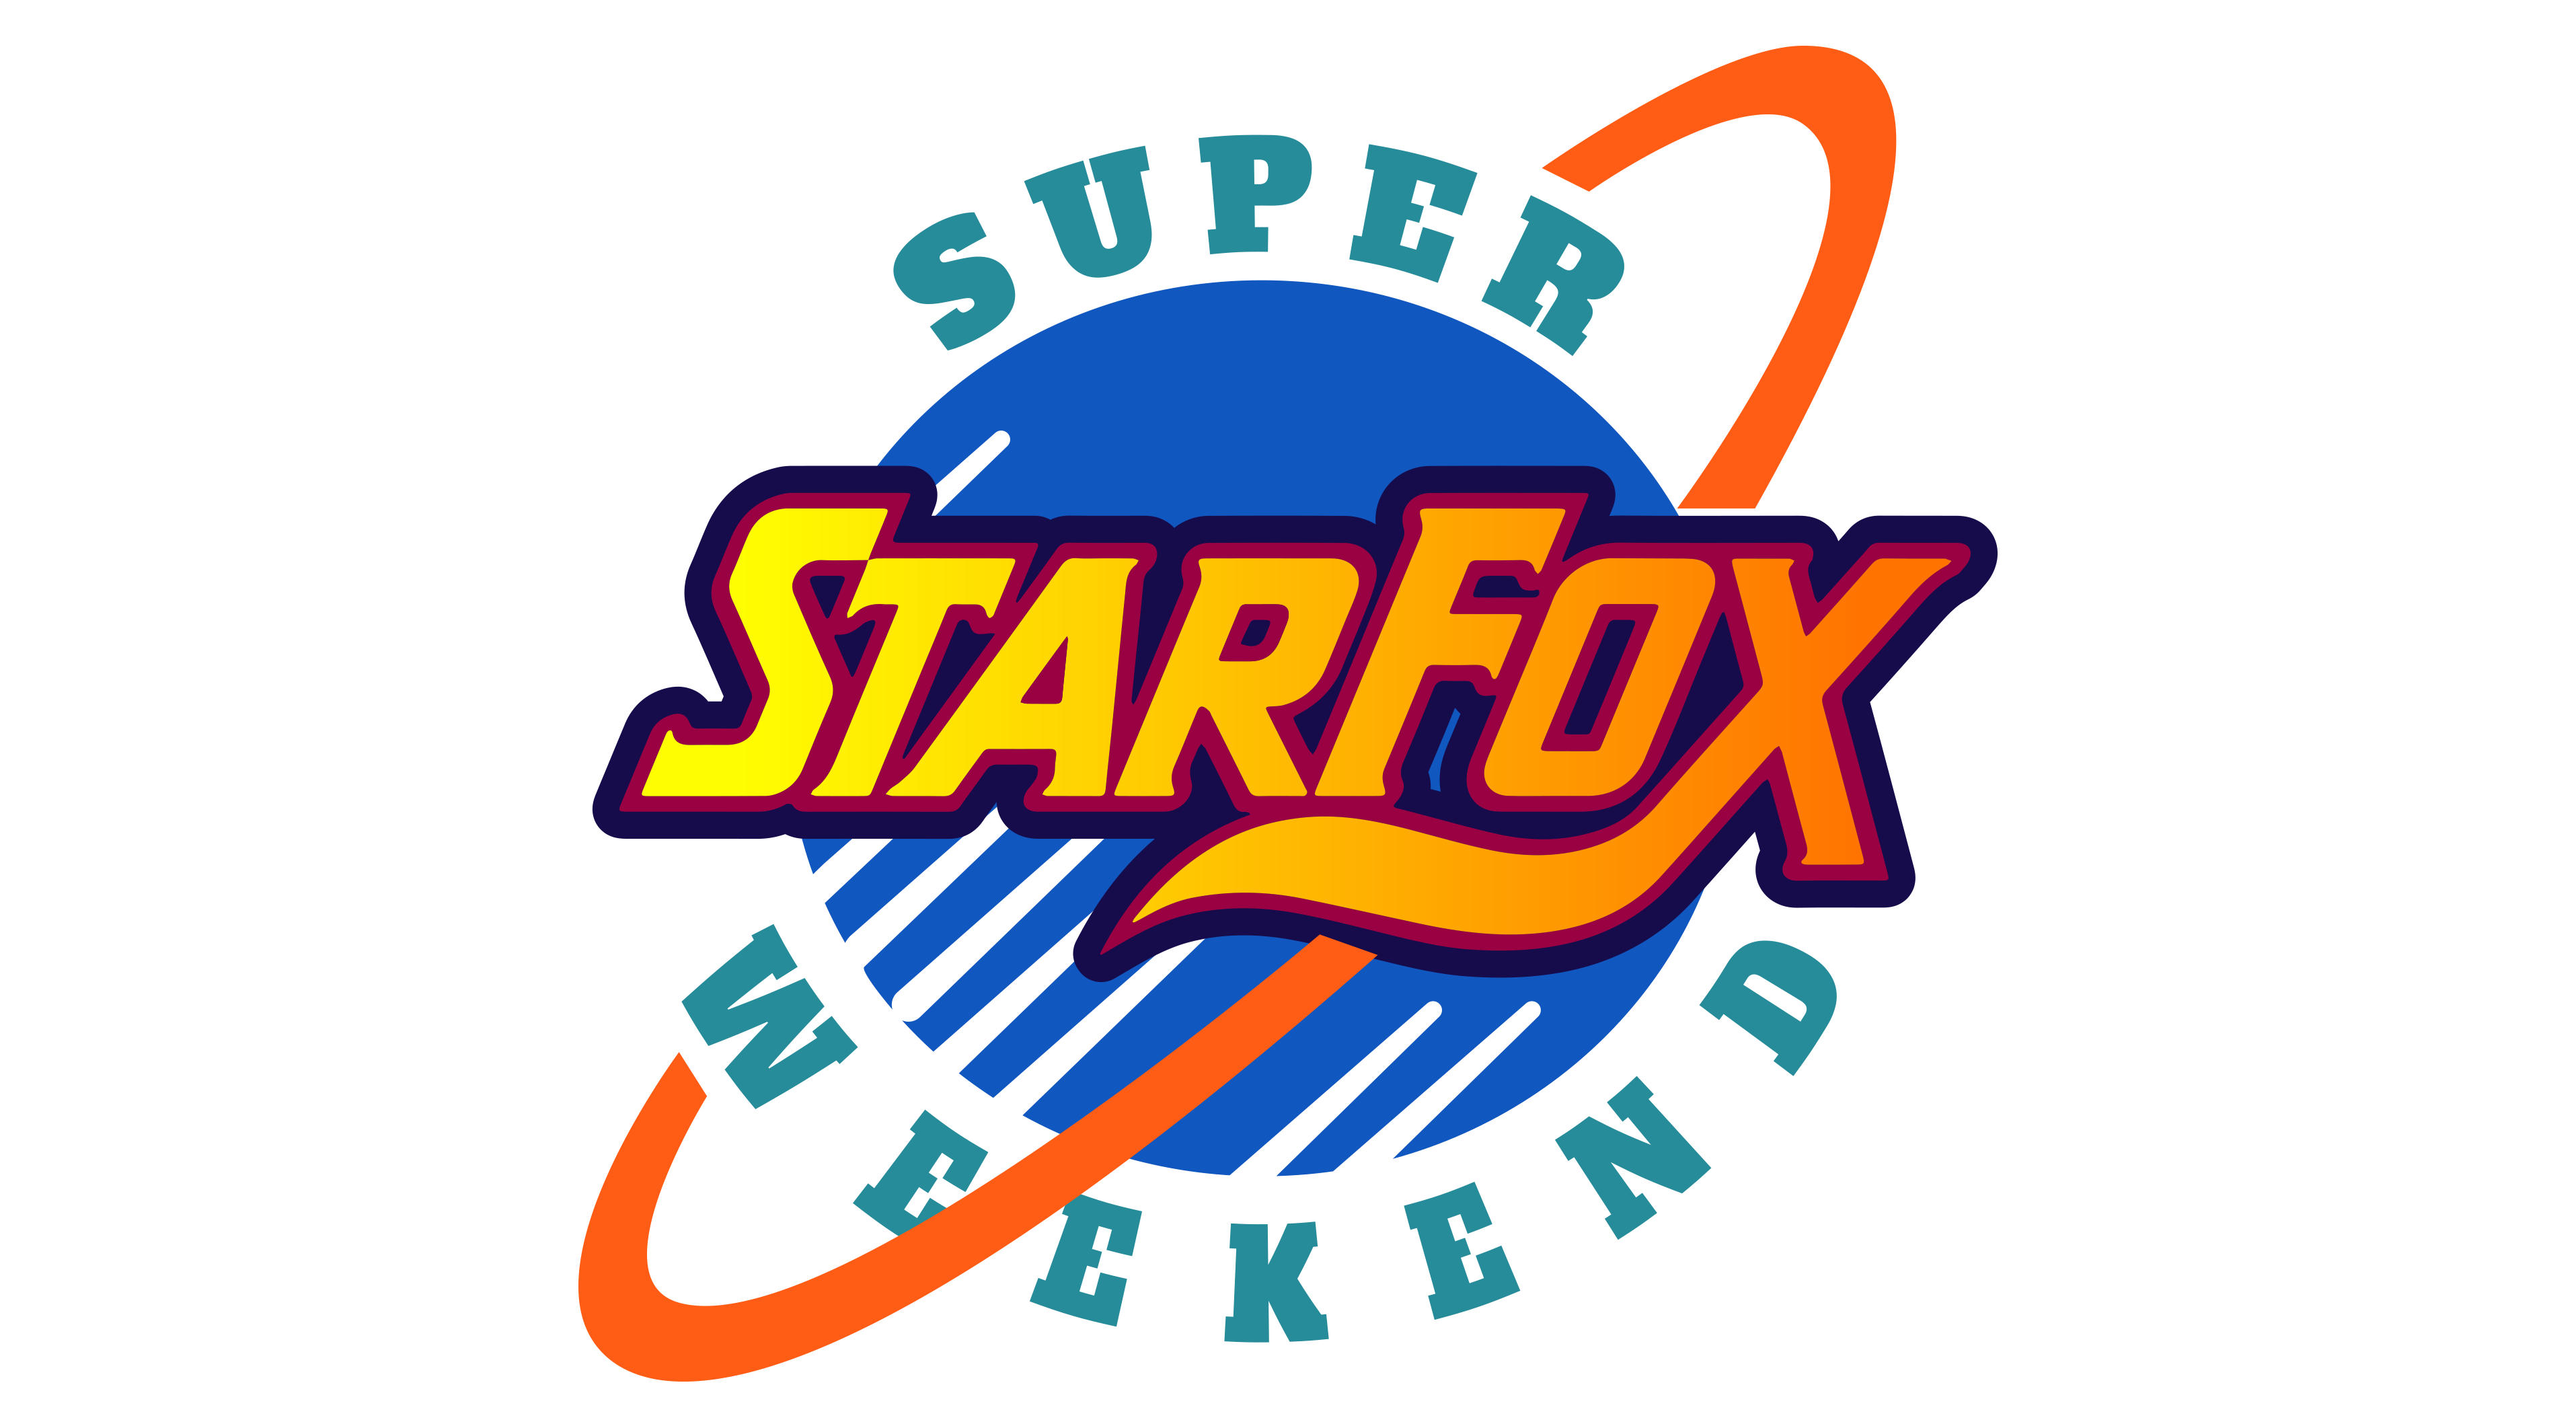 Snes Central: Super Star Fox Weekend / Starwing Competition